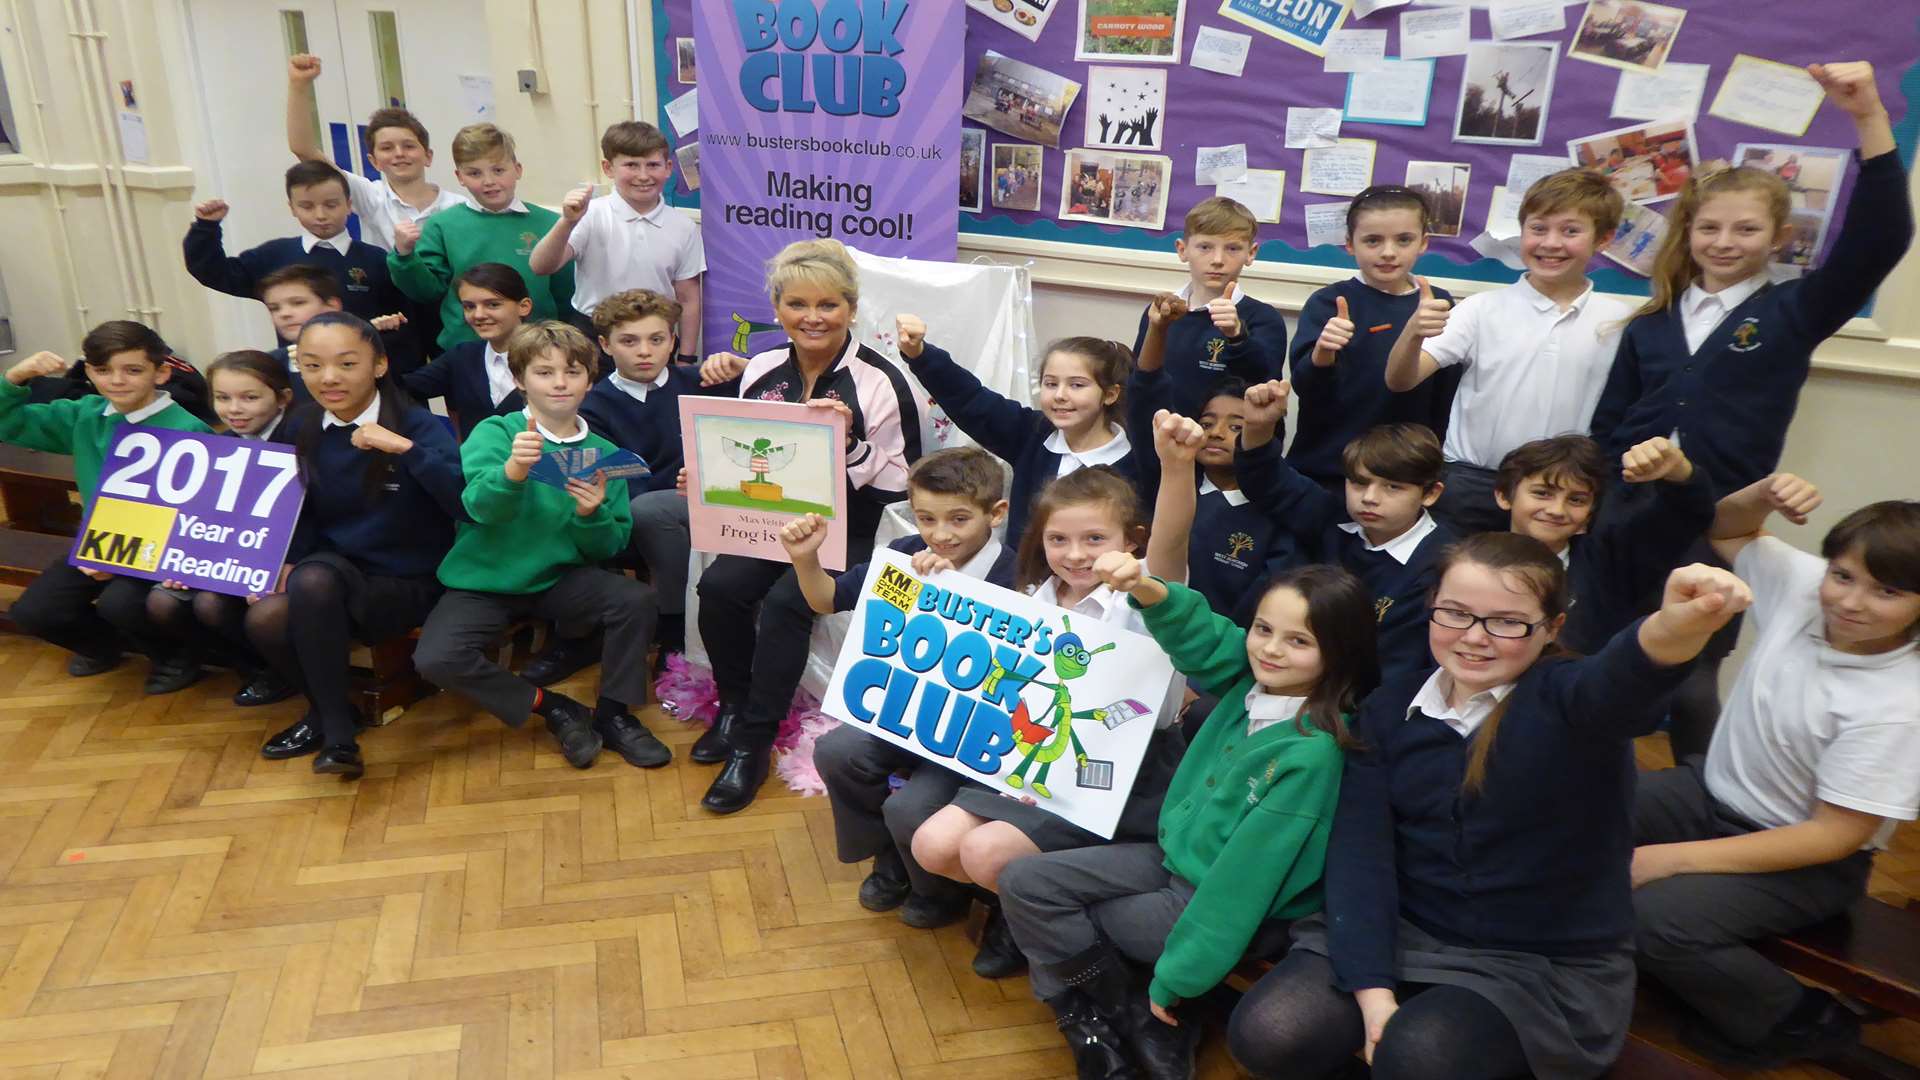 Willow Class at West Borough Primary School, Maidstone meet Cheryl Baker, Honorary Patron of the KM Charity Team. The class won a story time session with Cheryl for the entire school.